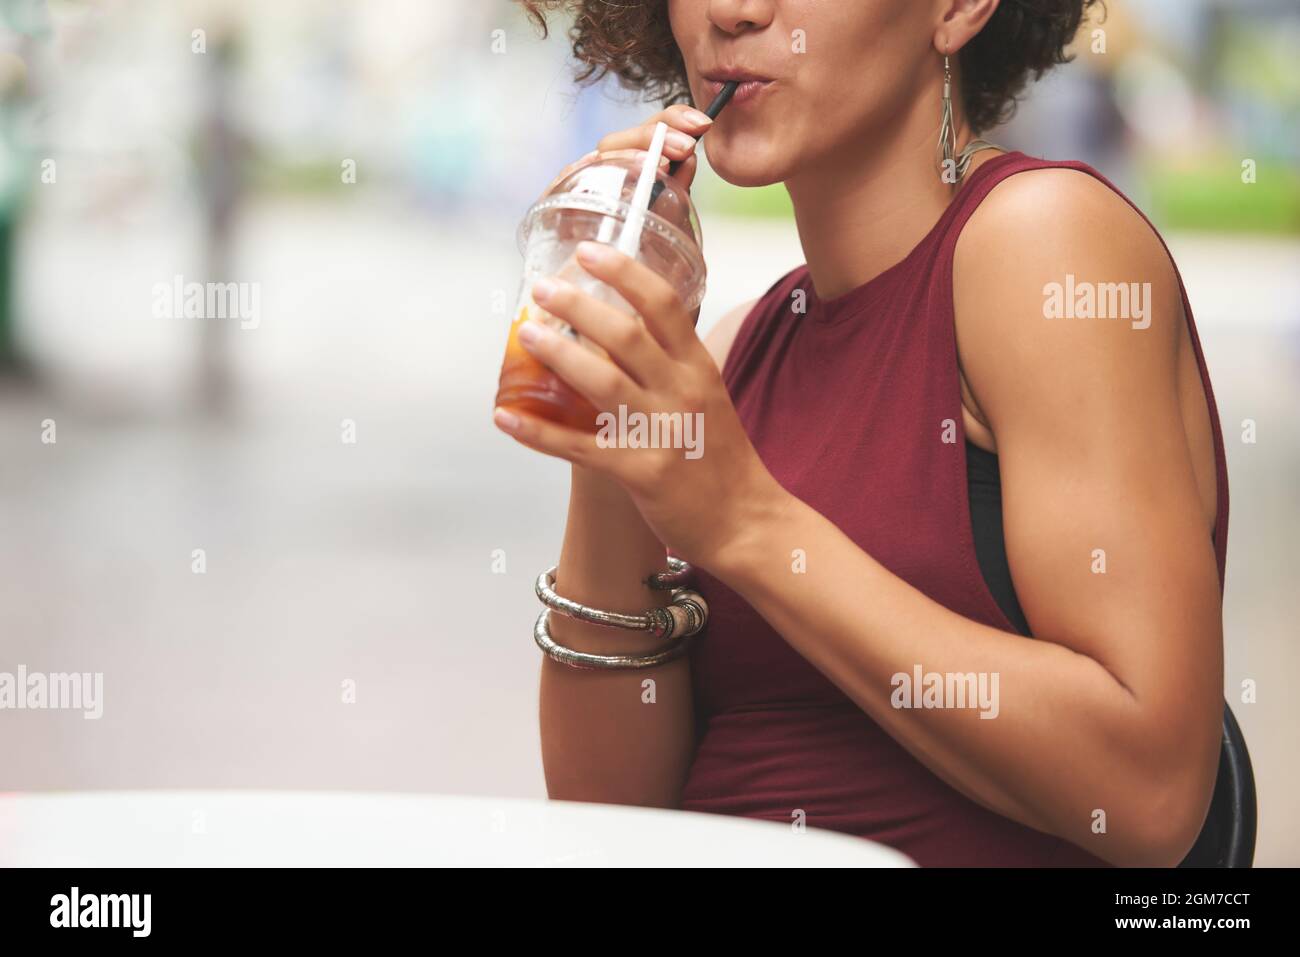 Cropped image of eautiful young woman sipping delicious fruit drink when sitting at cafe table outdoors Stock Photo